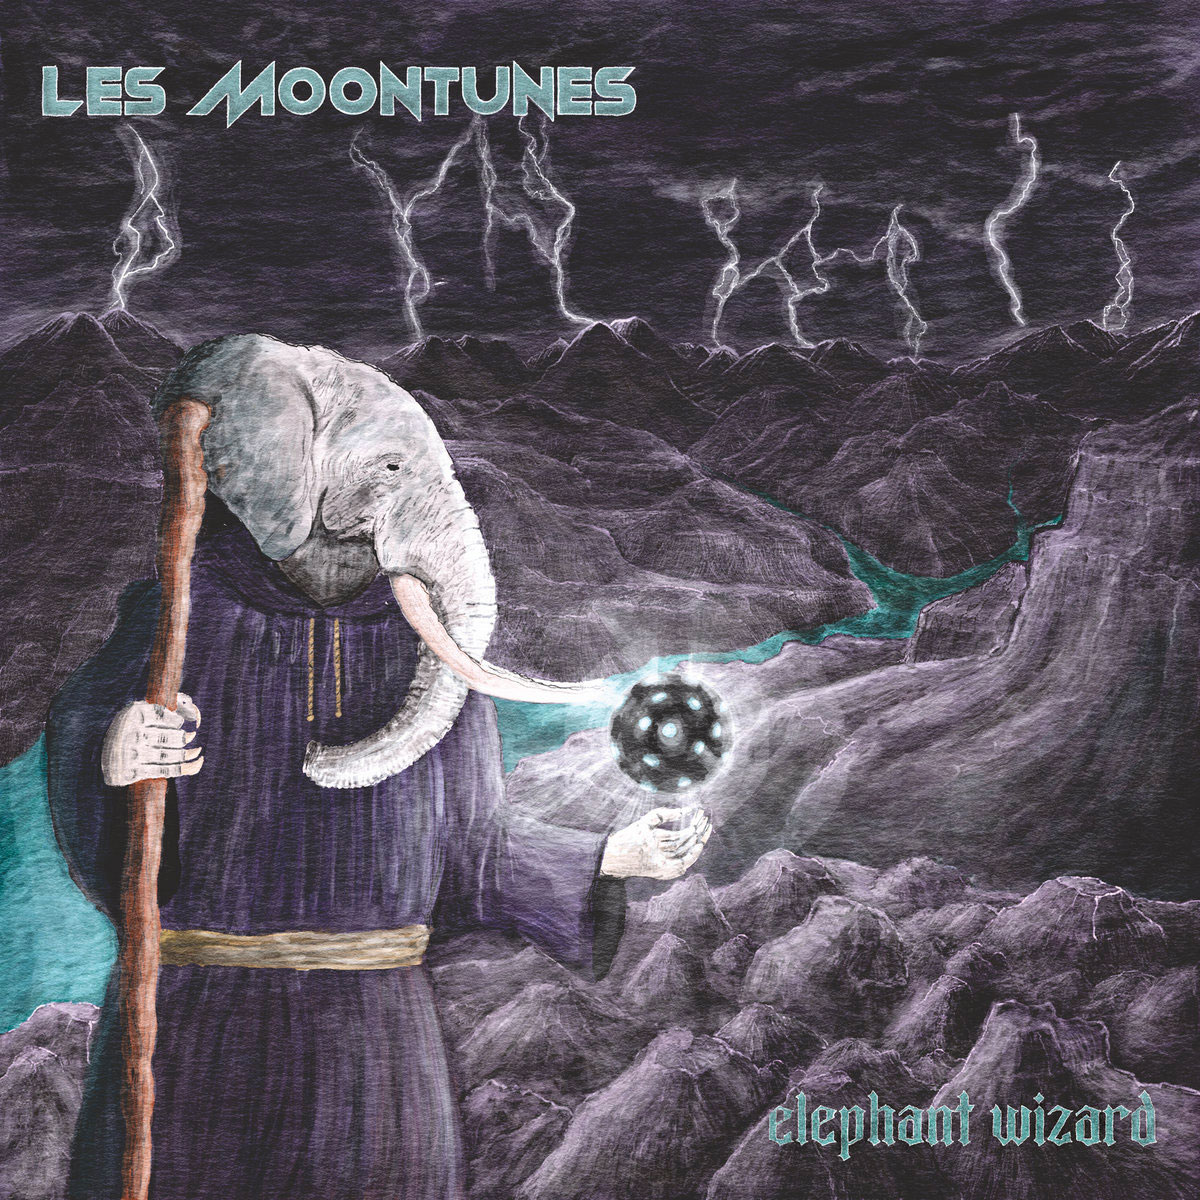 Elephant Wizard by Les Moontunes